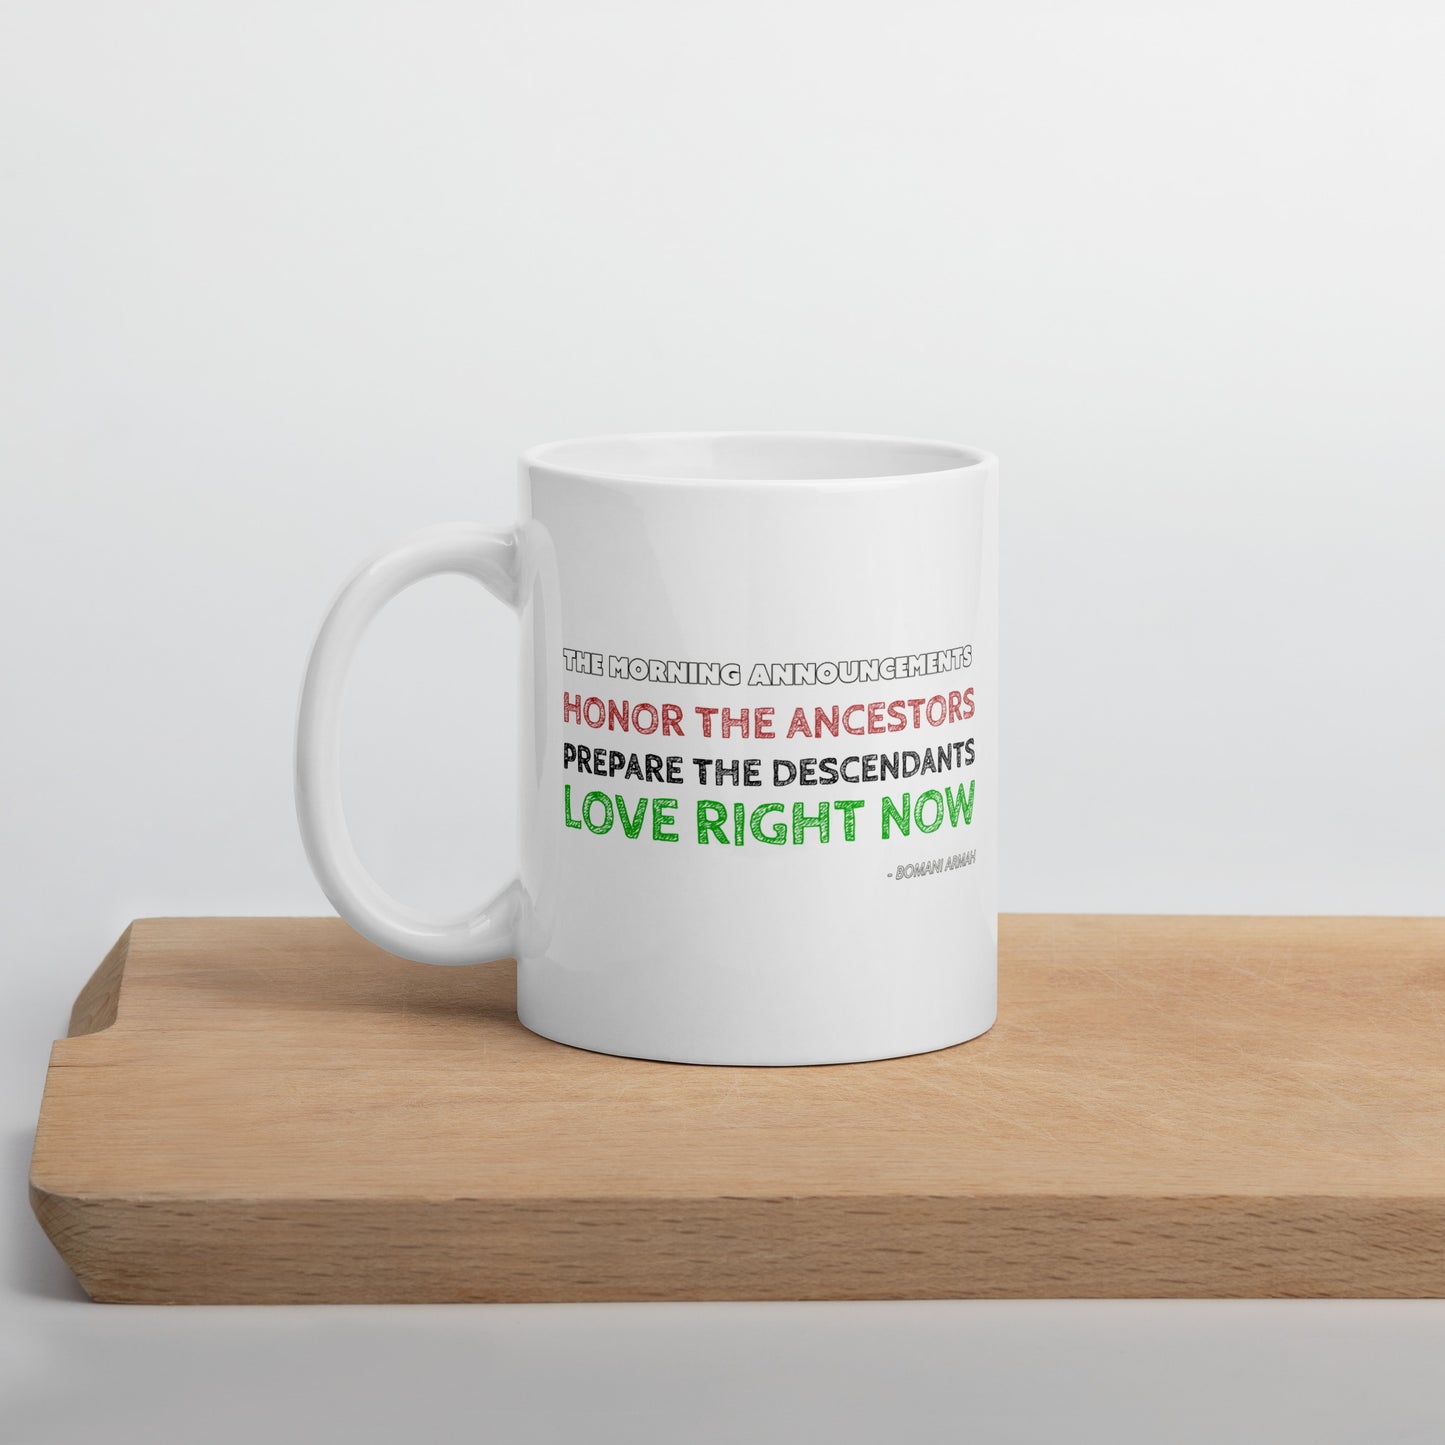 The Morning Announcements 2 sided mug